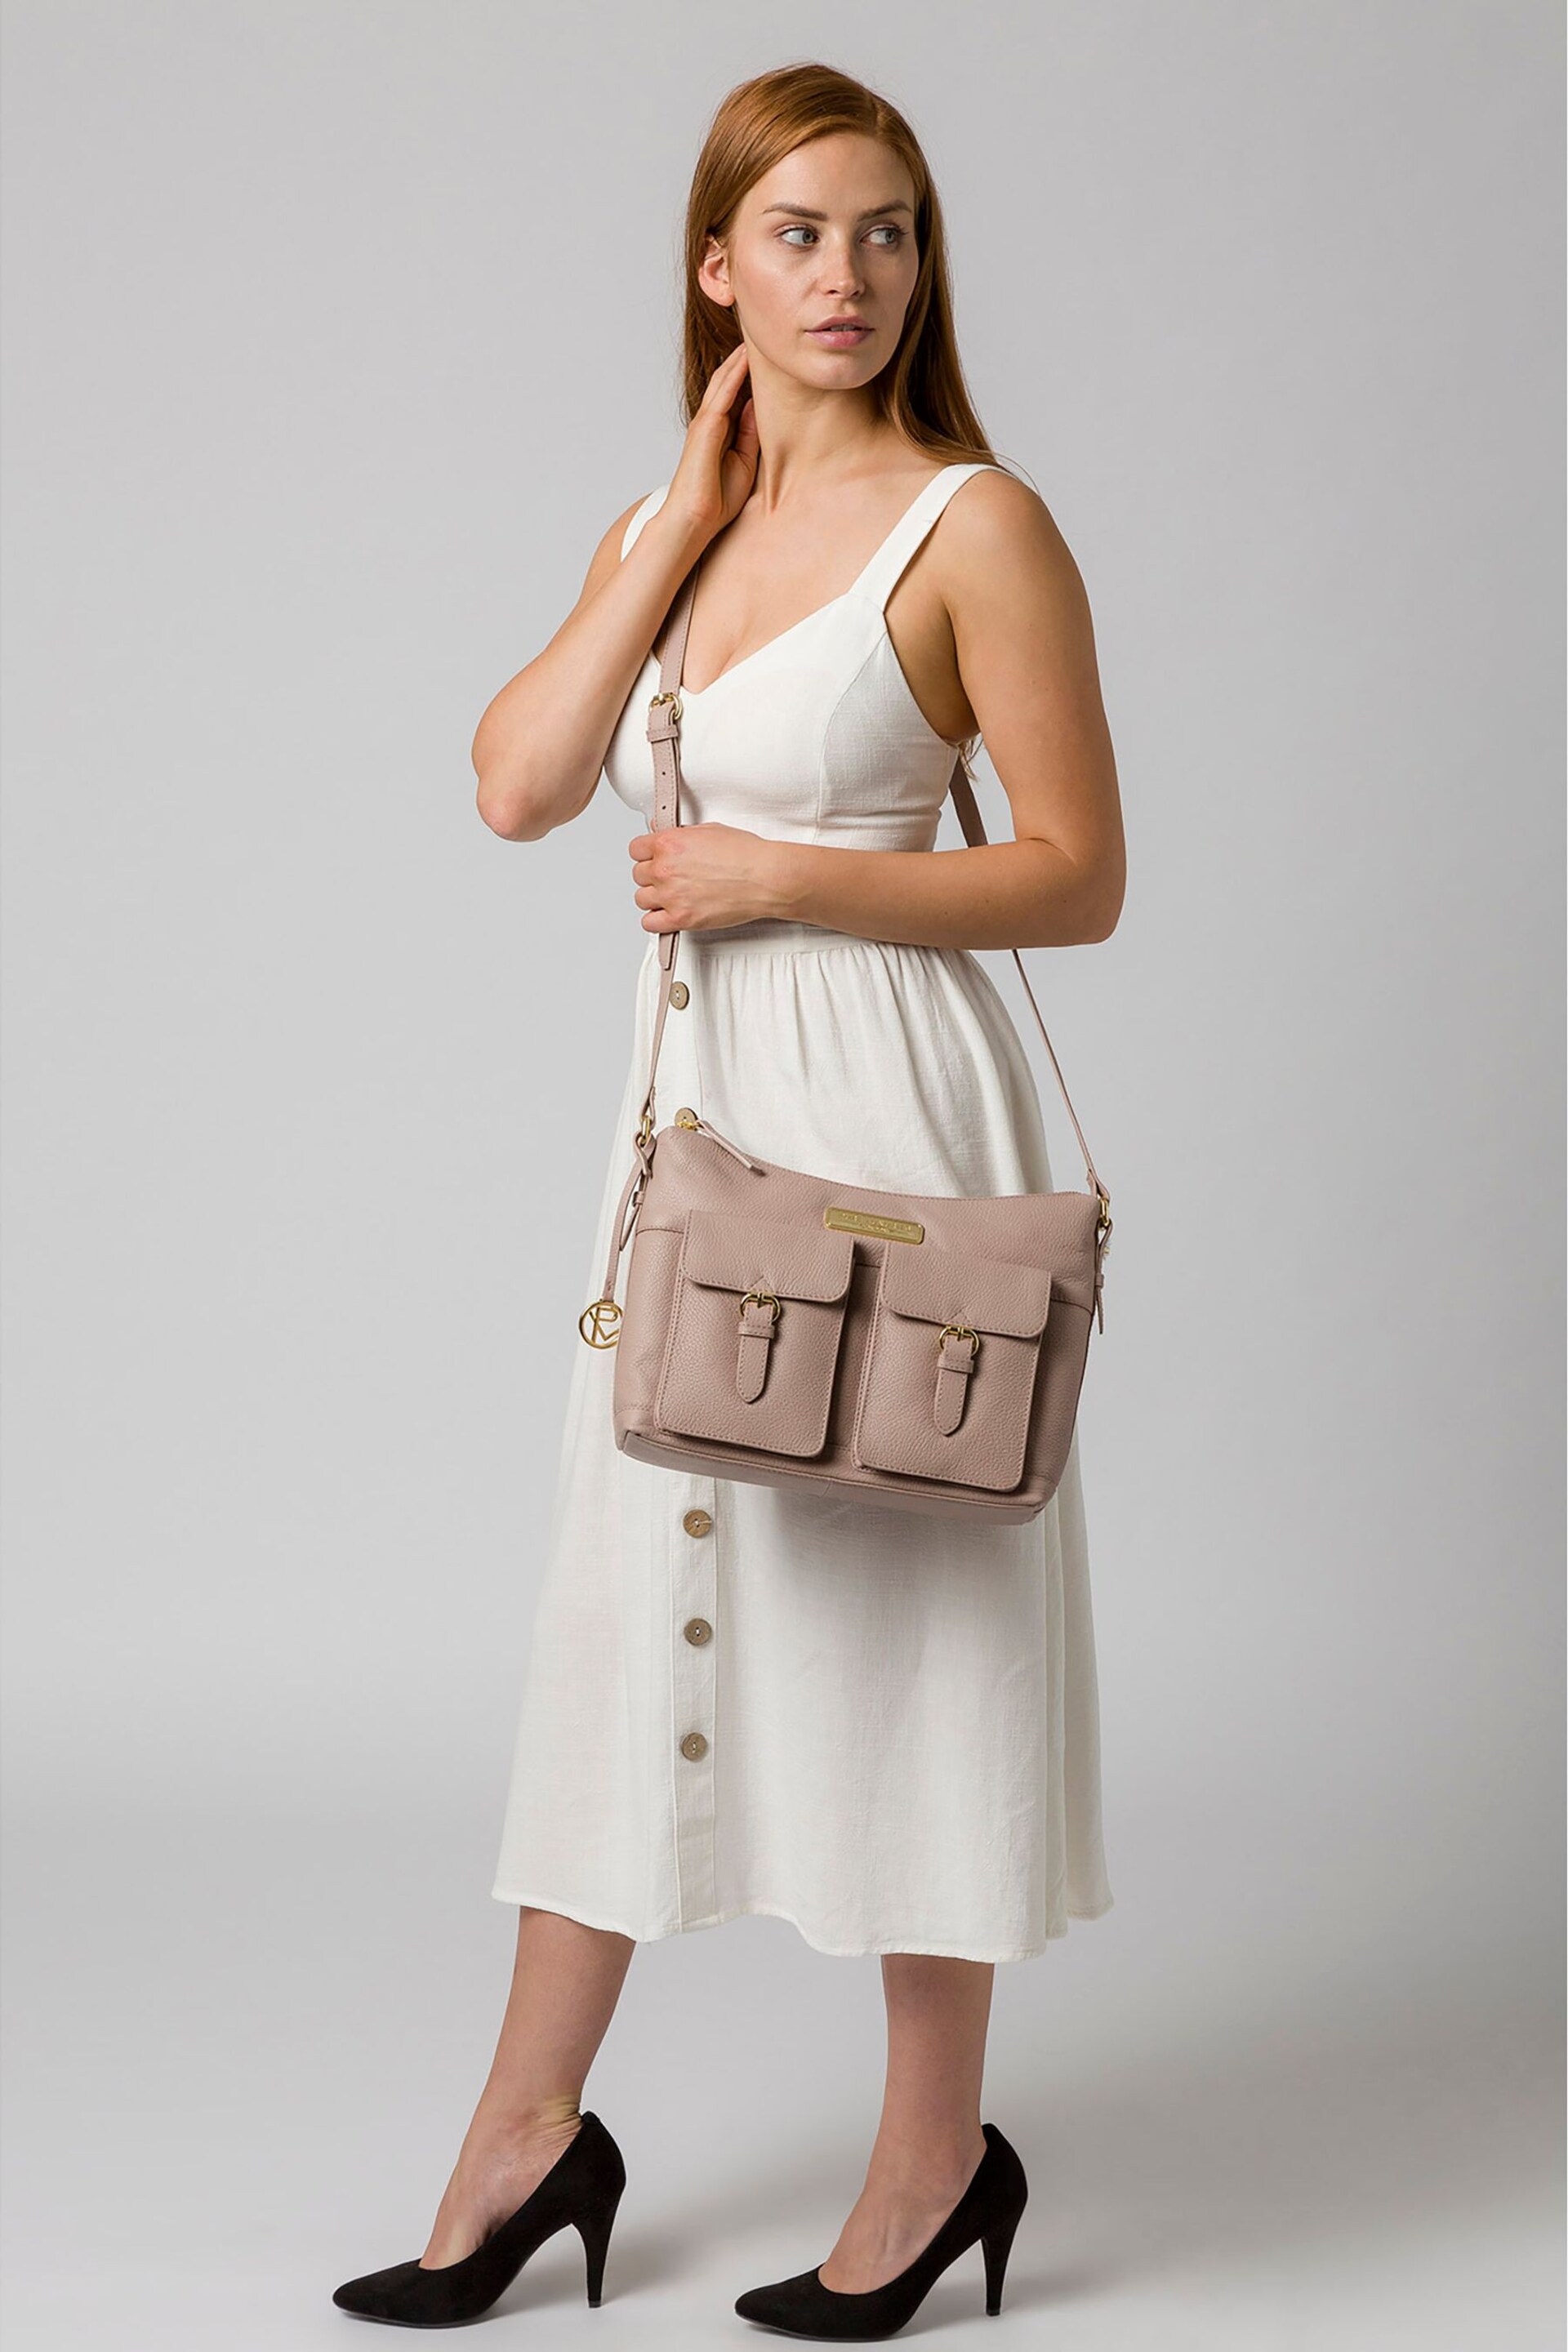 Pure Luxuries London Jenna Leather Shoulder Bag - Image 5 of 5